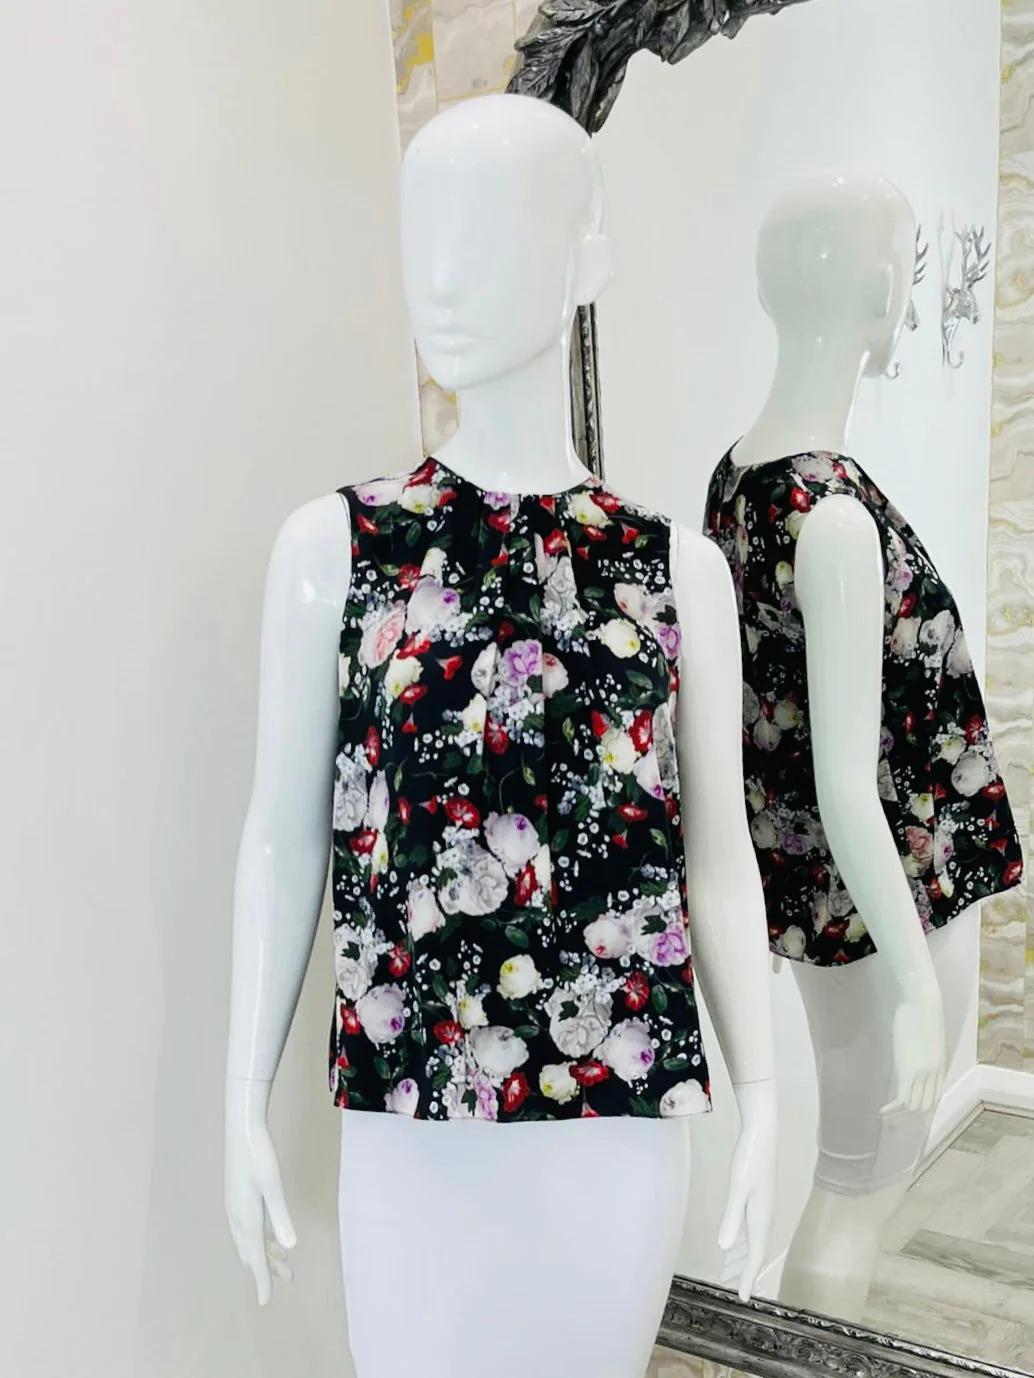 Erdem Floral Top

Black with multi-coloured flowers throughout. Sleeveless with dart. pleating to the front and key hole closure.

Additional information:
Size – S (Label missing but corresponds)
Composition- Label Missing - Feels Like Silk